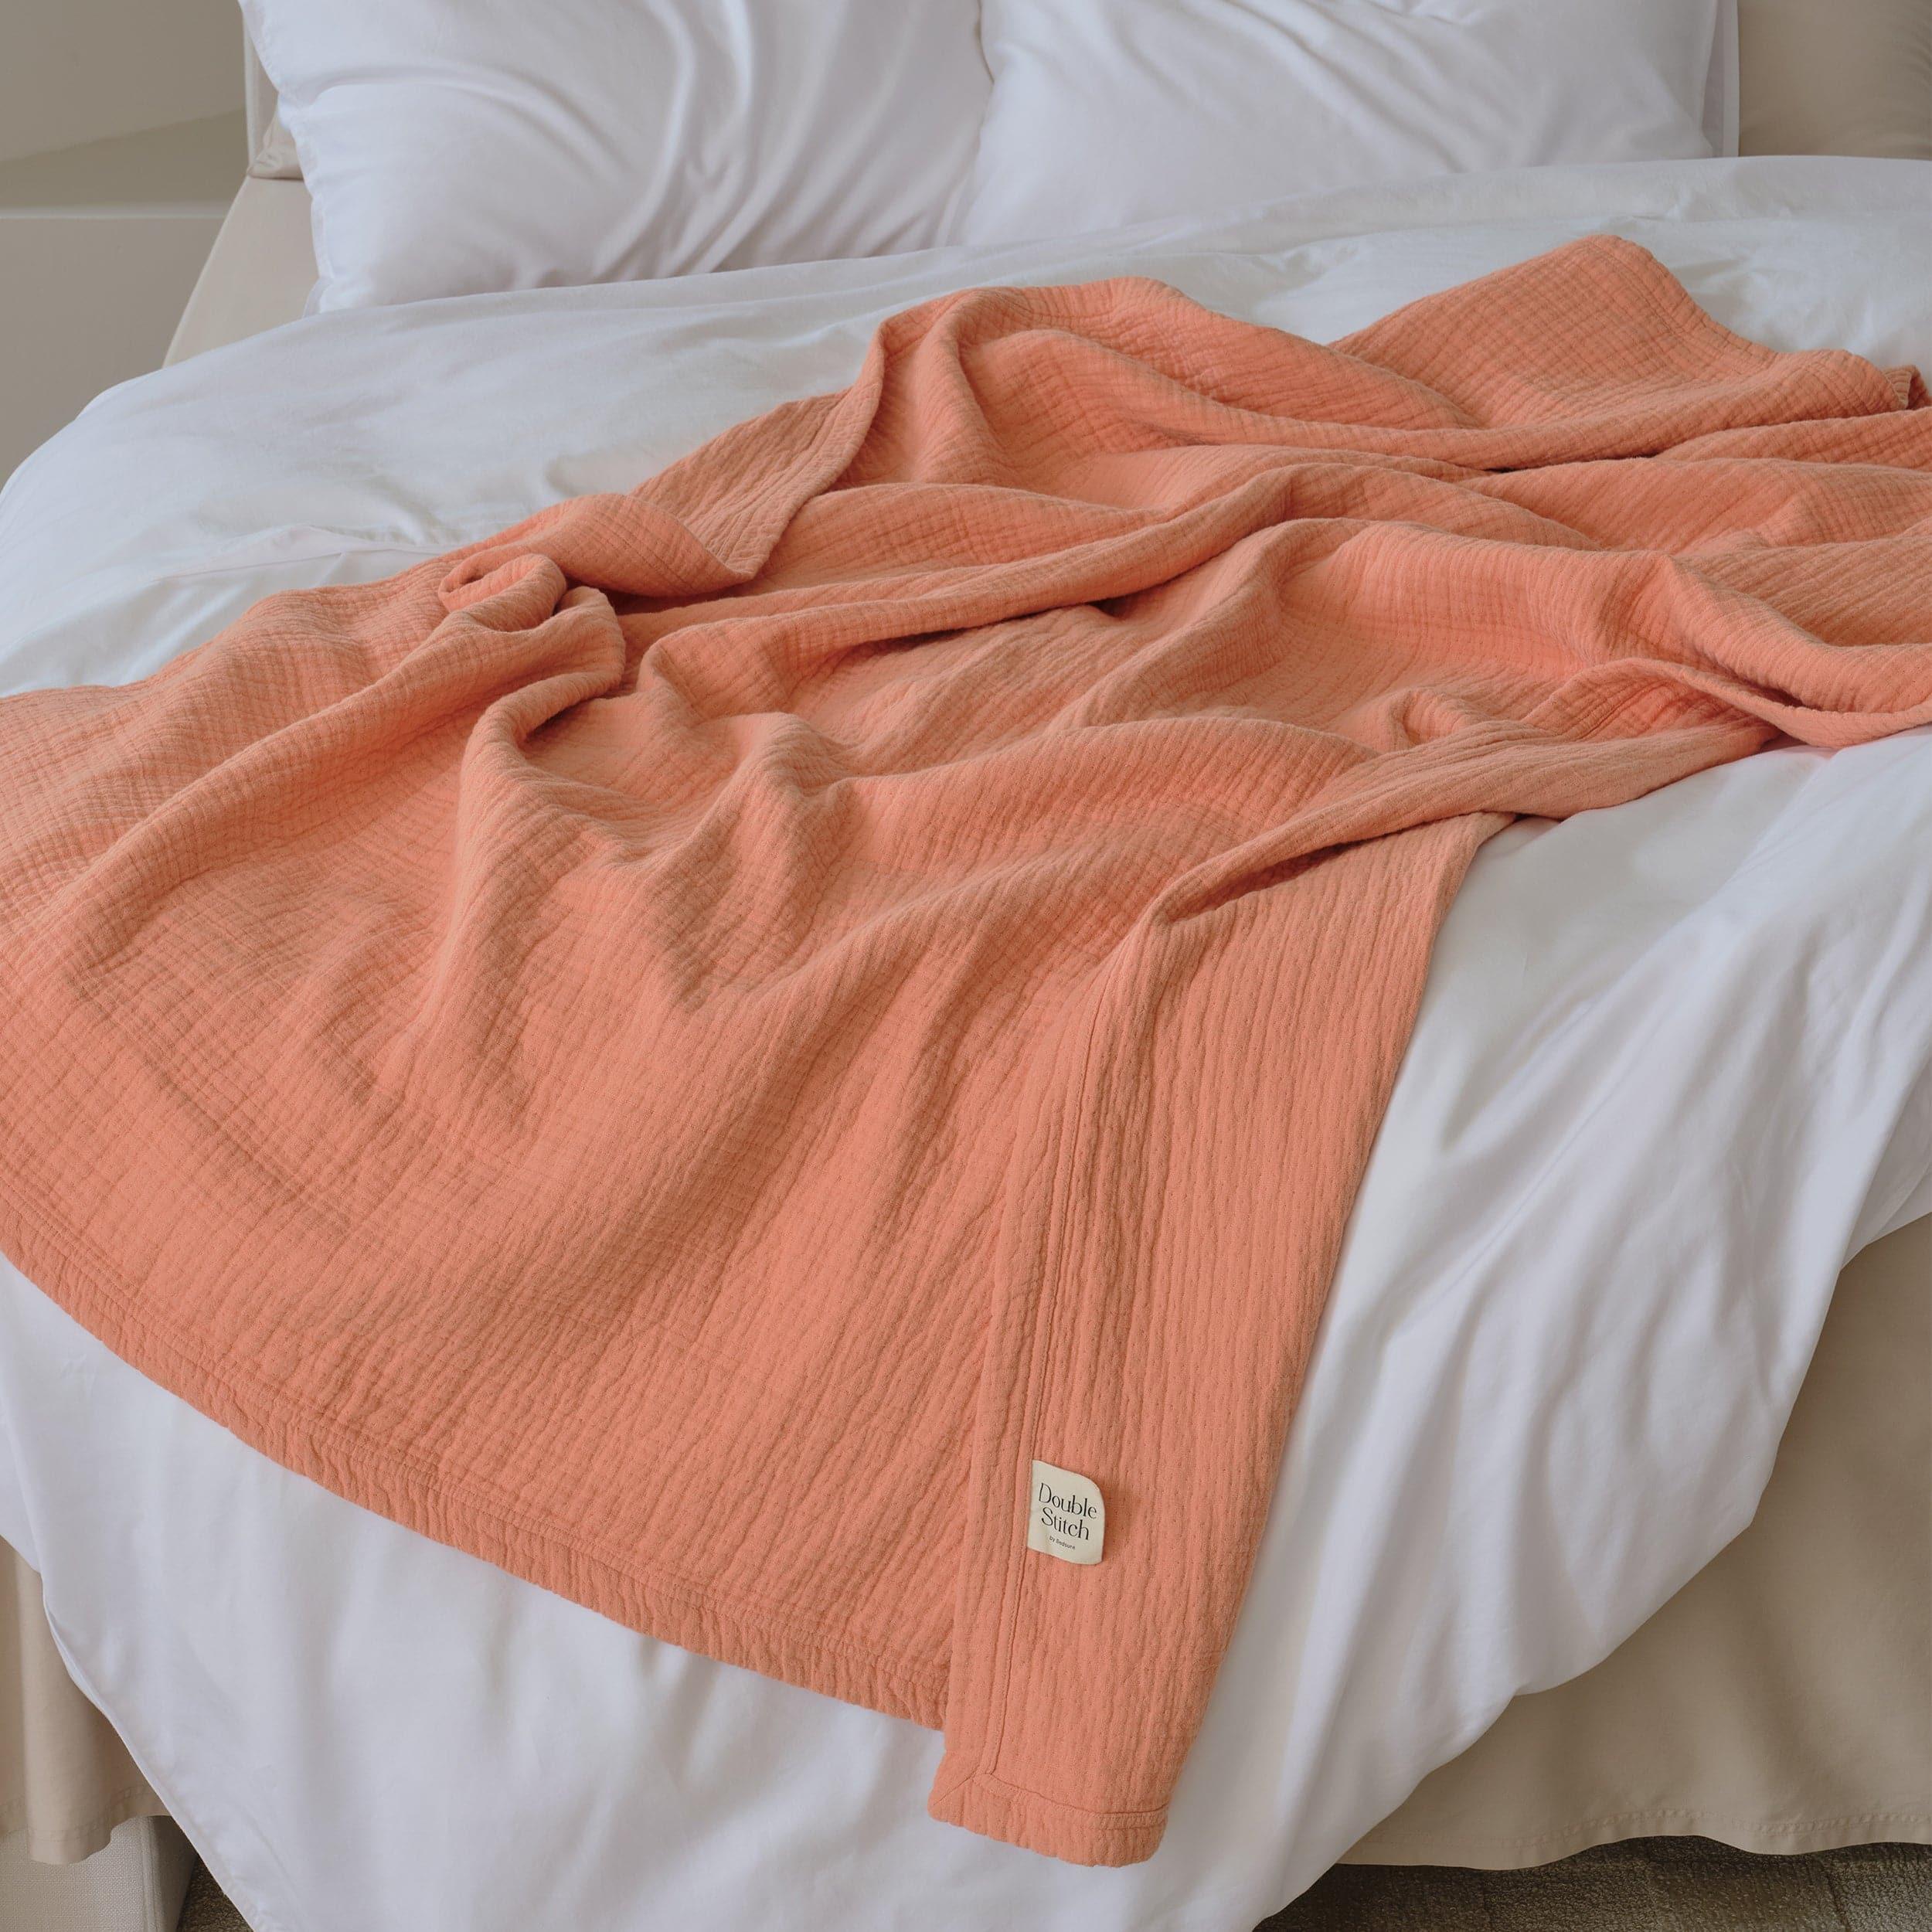 The modern throw blanket is large enough to wrap yourself in for ultimate comfort.